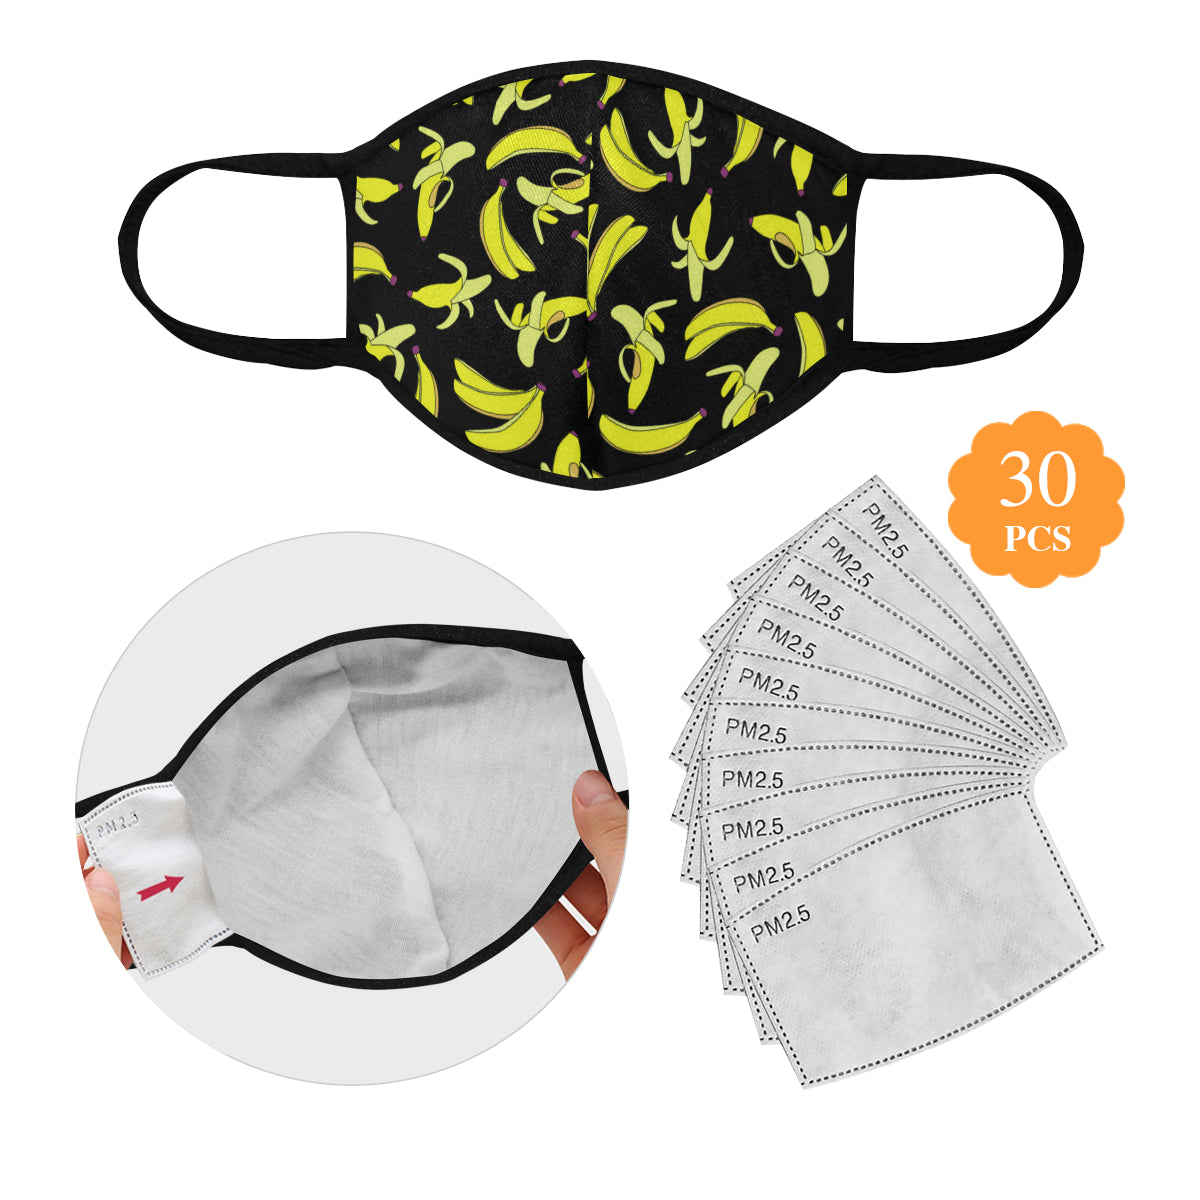 Going Bananas Cotton Fabric Face Mask with filter slot (30 Filters Included) - Non-medical use